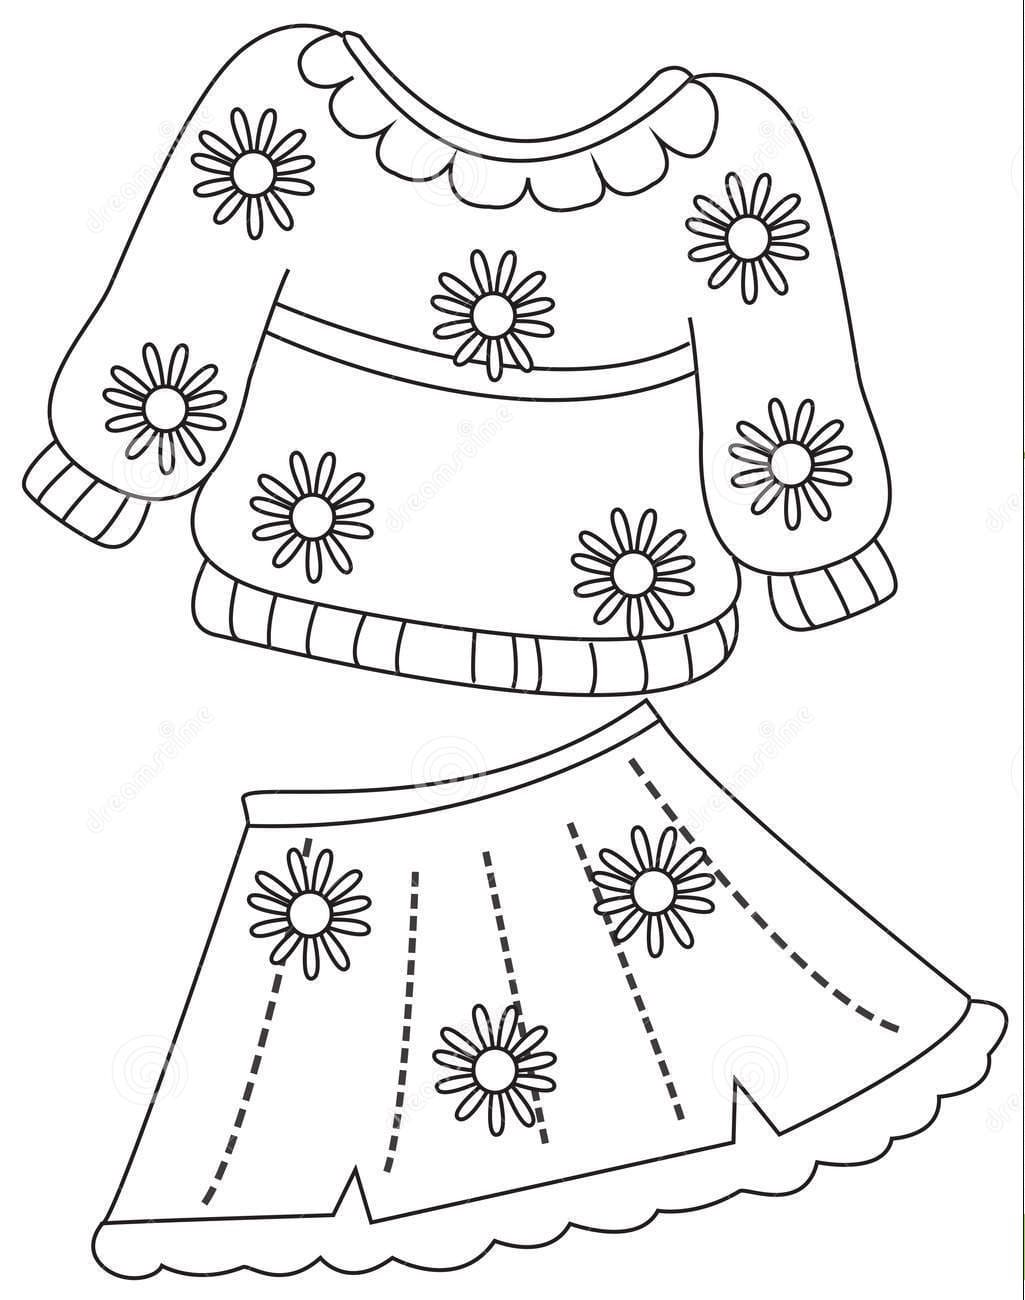 Coloring pages for kids 20 20 years. Download or print online